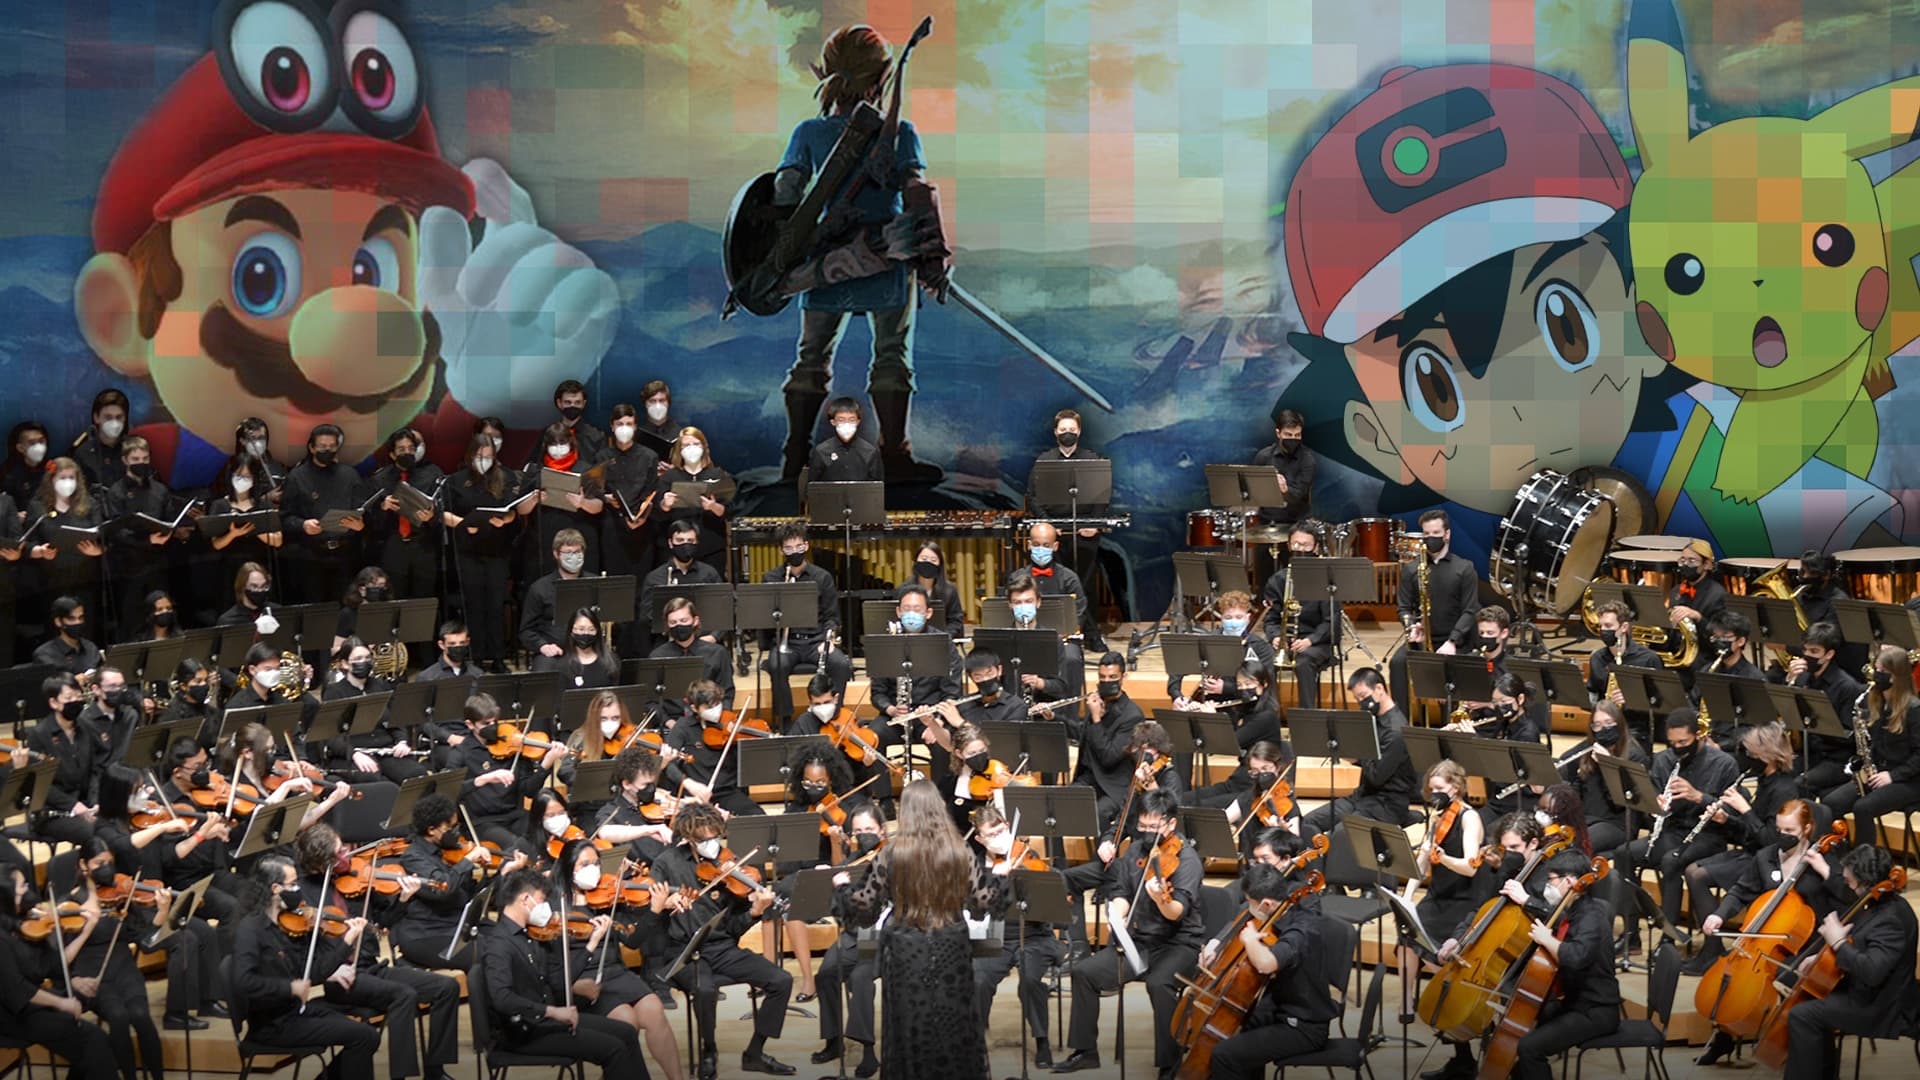 Gamer Symphony Orchestra with Mario, Zelda and Pokémon characters in the background